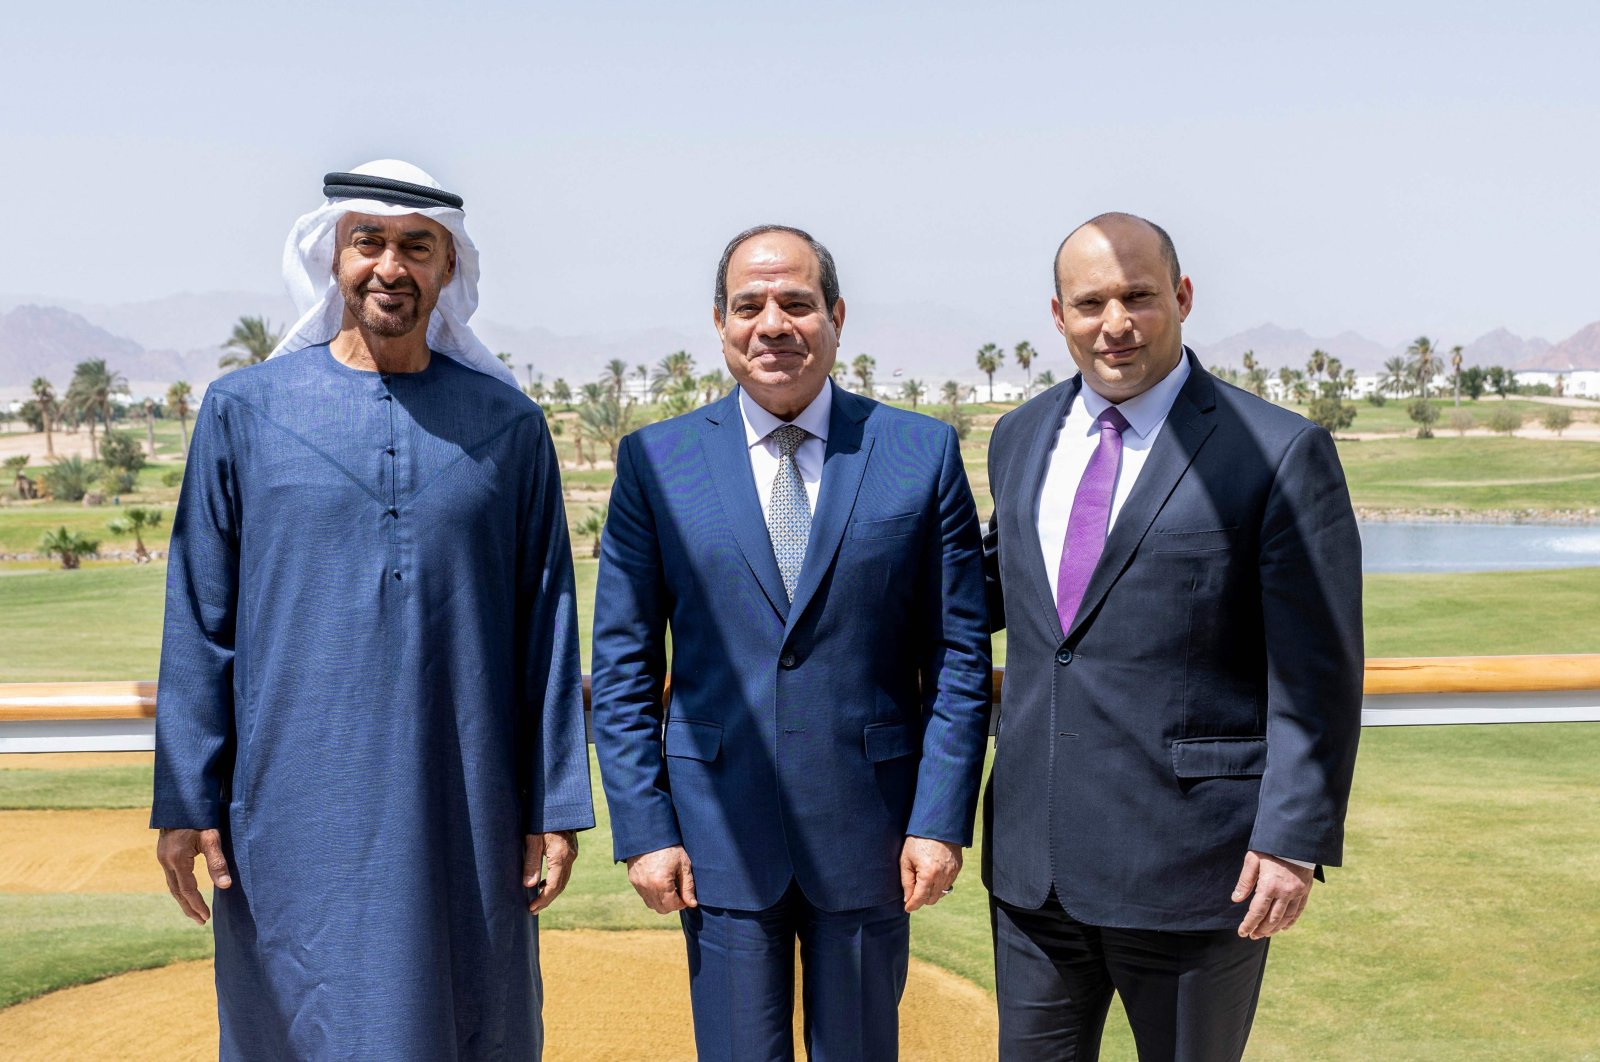 Abu Dhabi Crown Prince Sheikh Mohammed bin Zayed Al Nahyan (L), Egyptian President Abdel-Fattah el-Sissi (C) and Israeli Prime Minister Naftali Bennett pose for a picture after a meeting in the Red Sea resort of Sharm el-Sheikh, Egypt, in this handout released by the UAE Ministry of Presidential Affairs on March 22, 2022. (AFP Photo)